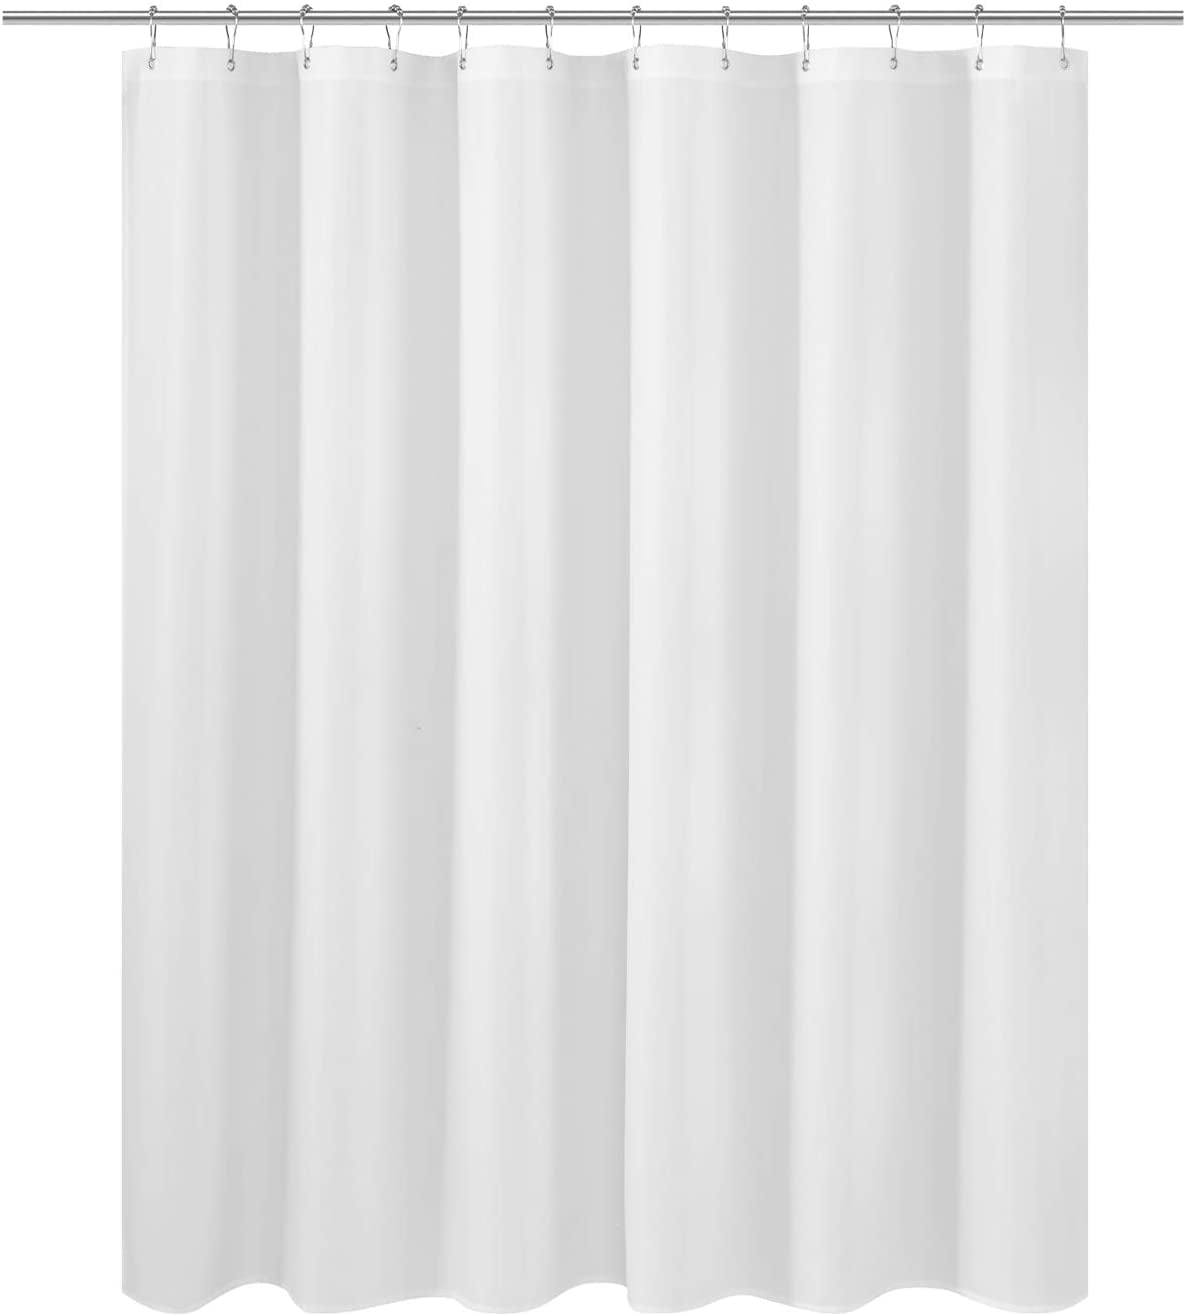 Whi Details about   Fabric Shower Curtain Liner 60 inches Long Hotel Quality Machine Washable 